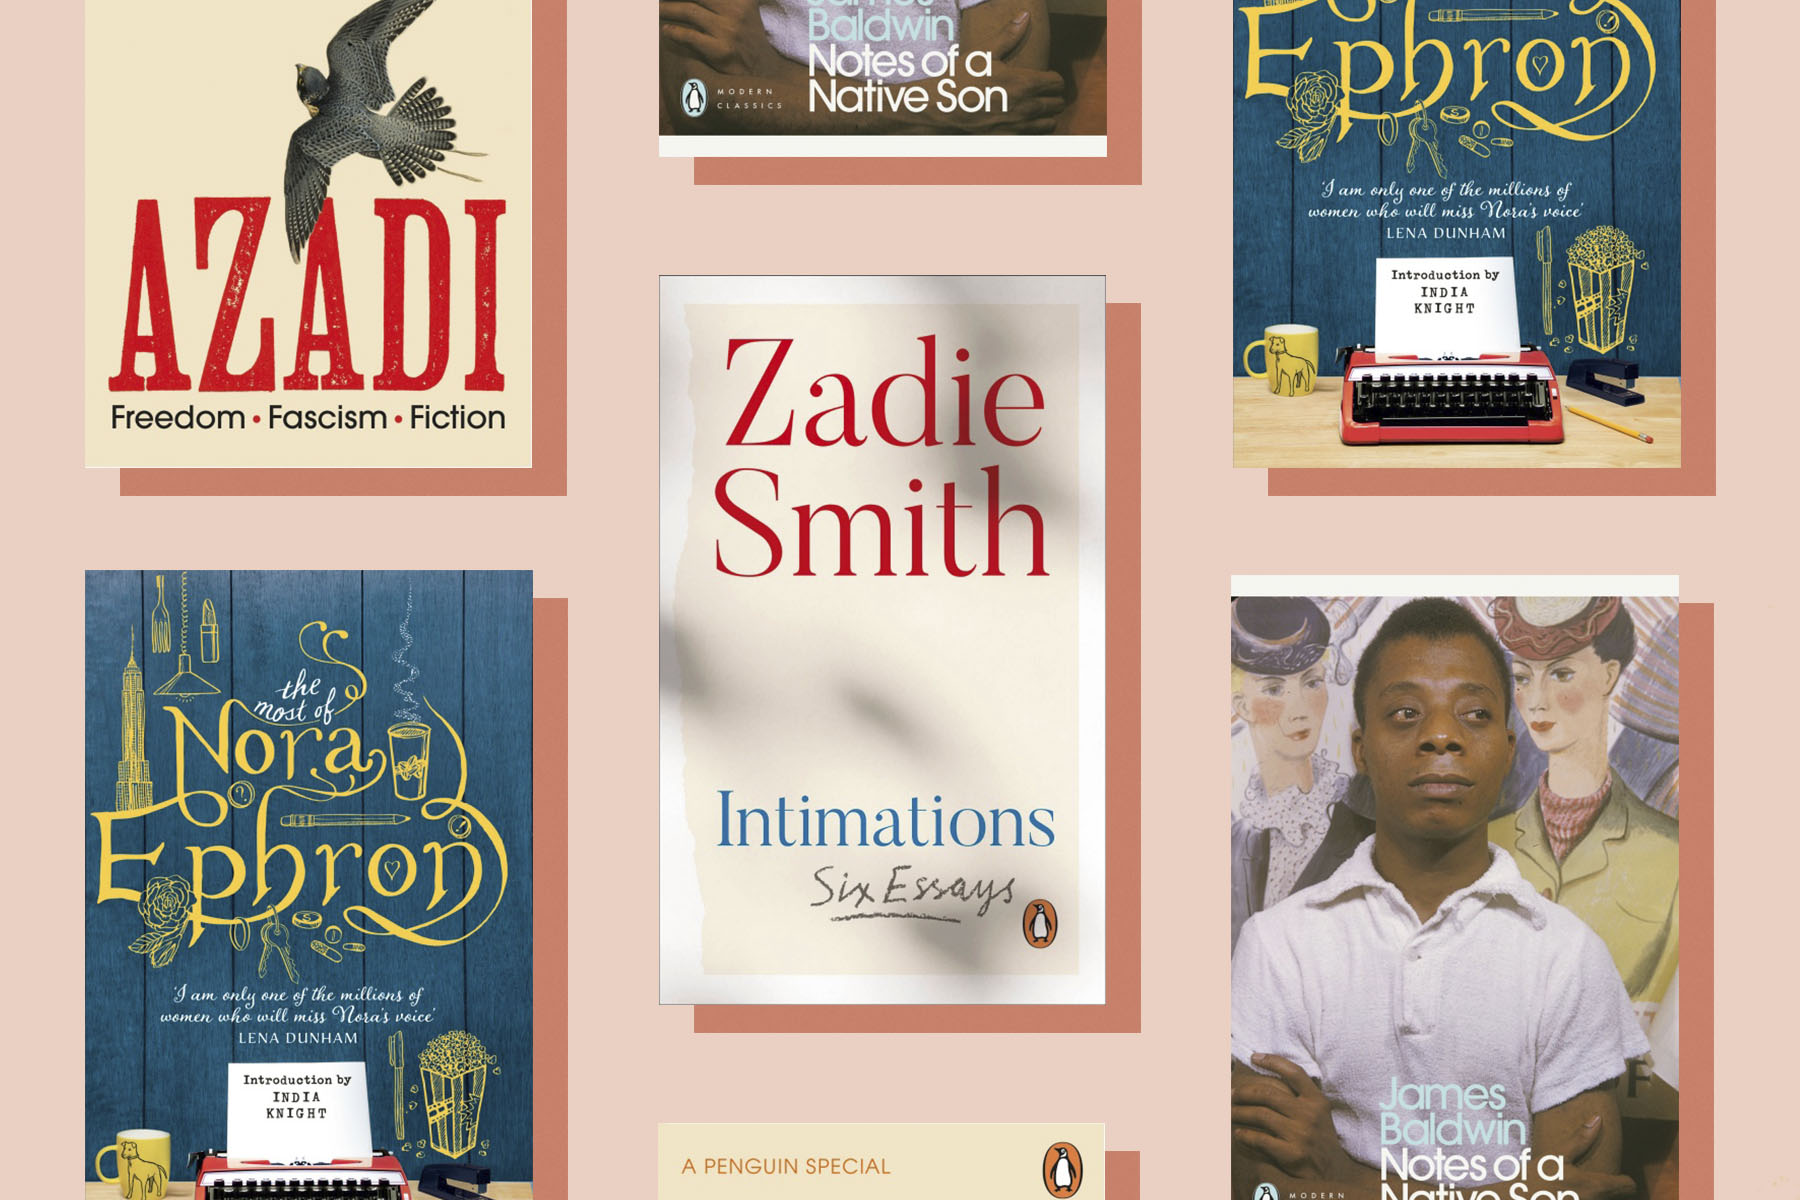 The best essay collections including Zadie Smith's Intimations, James Baldwin's Notes of a Native Son and Nora Ephron's The Most of Nora Ephron.